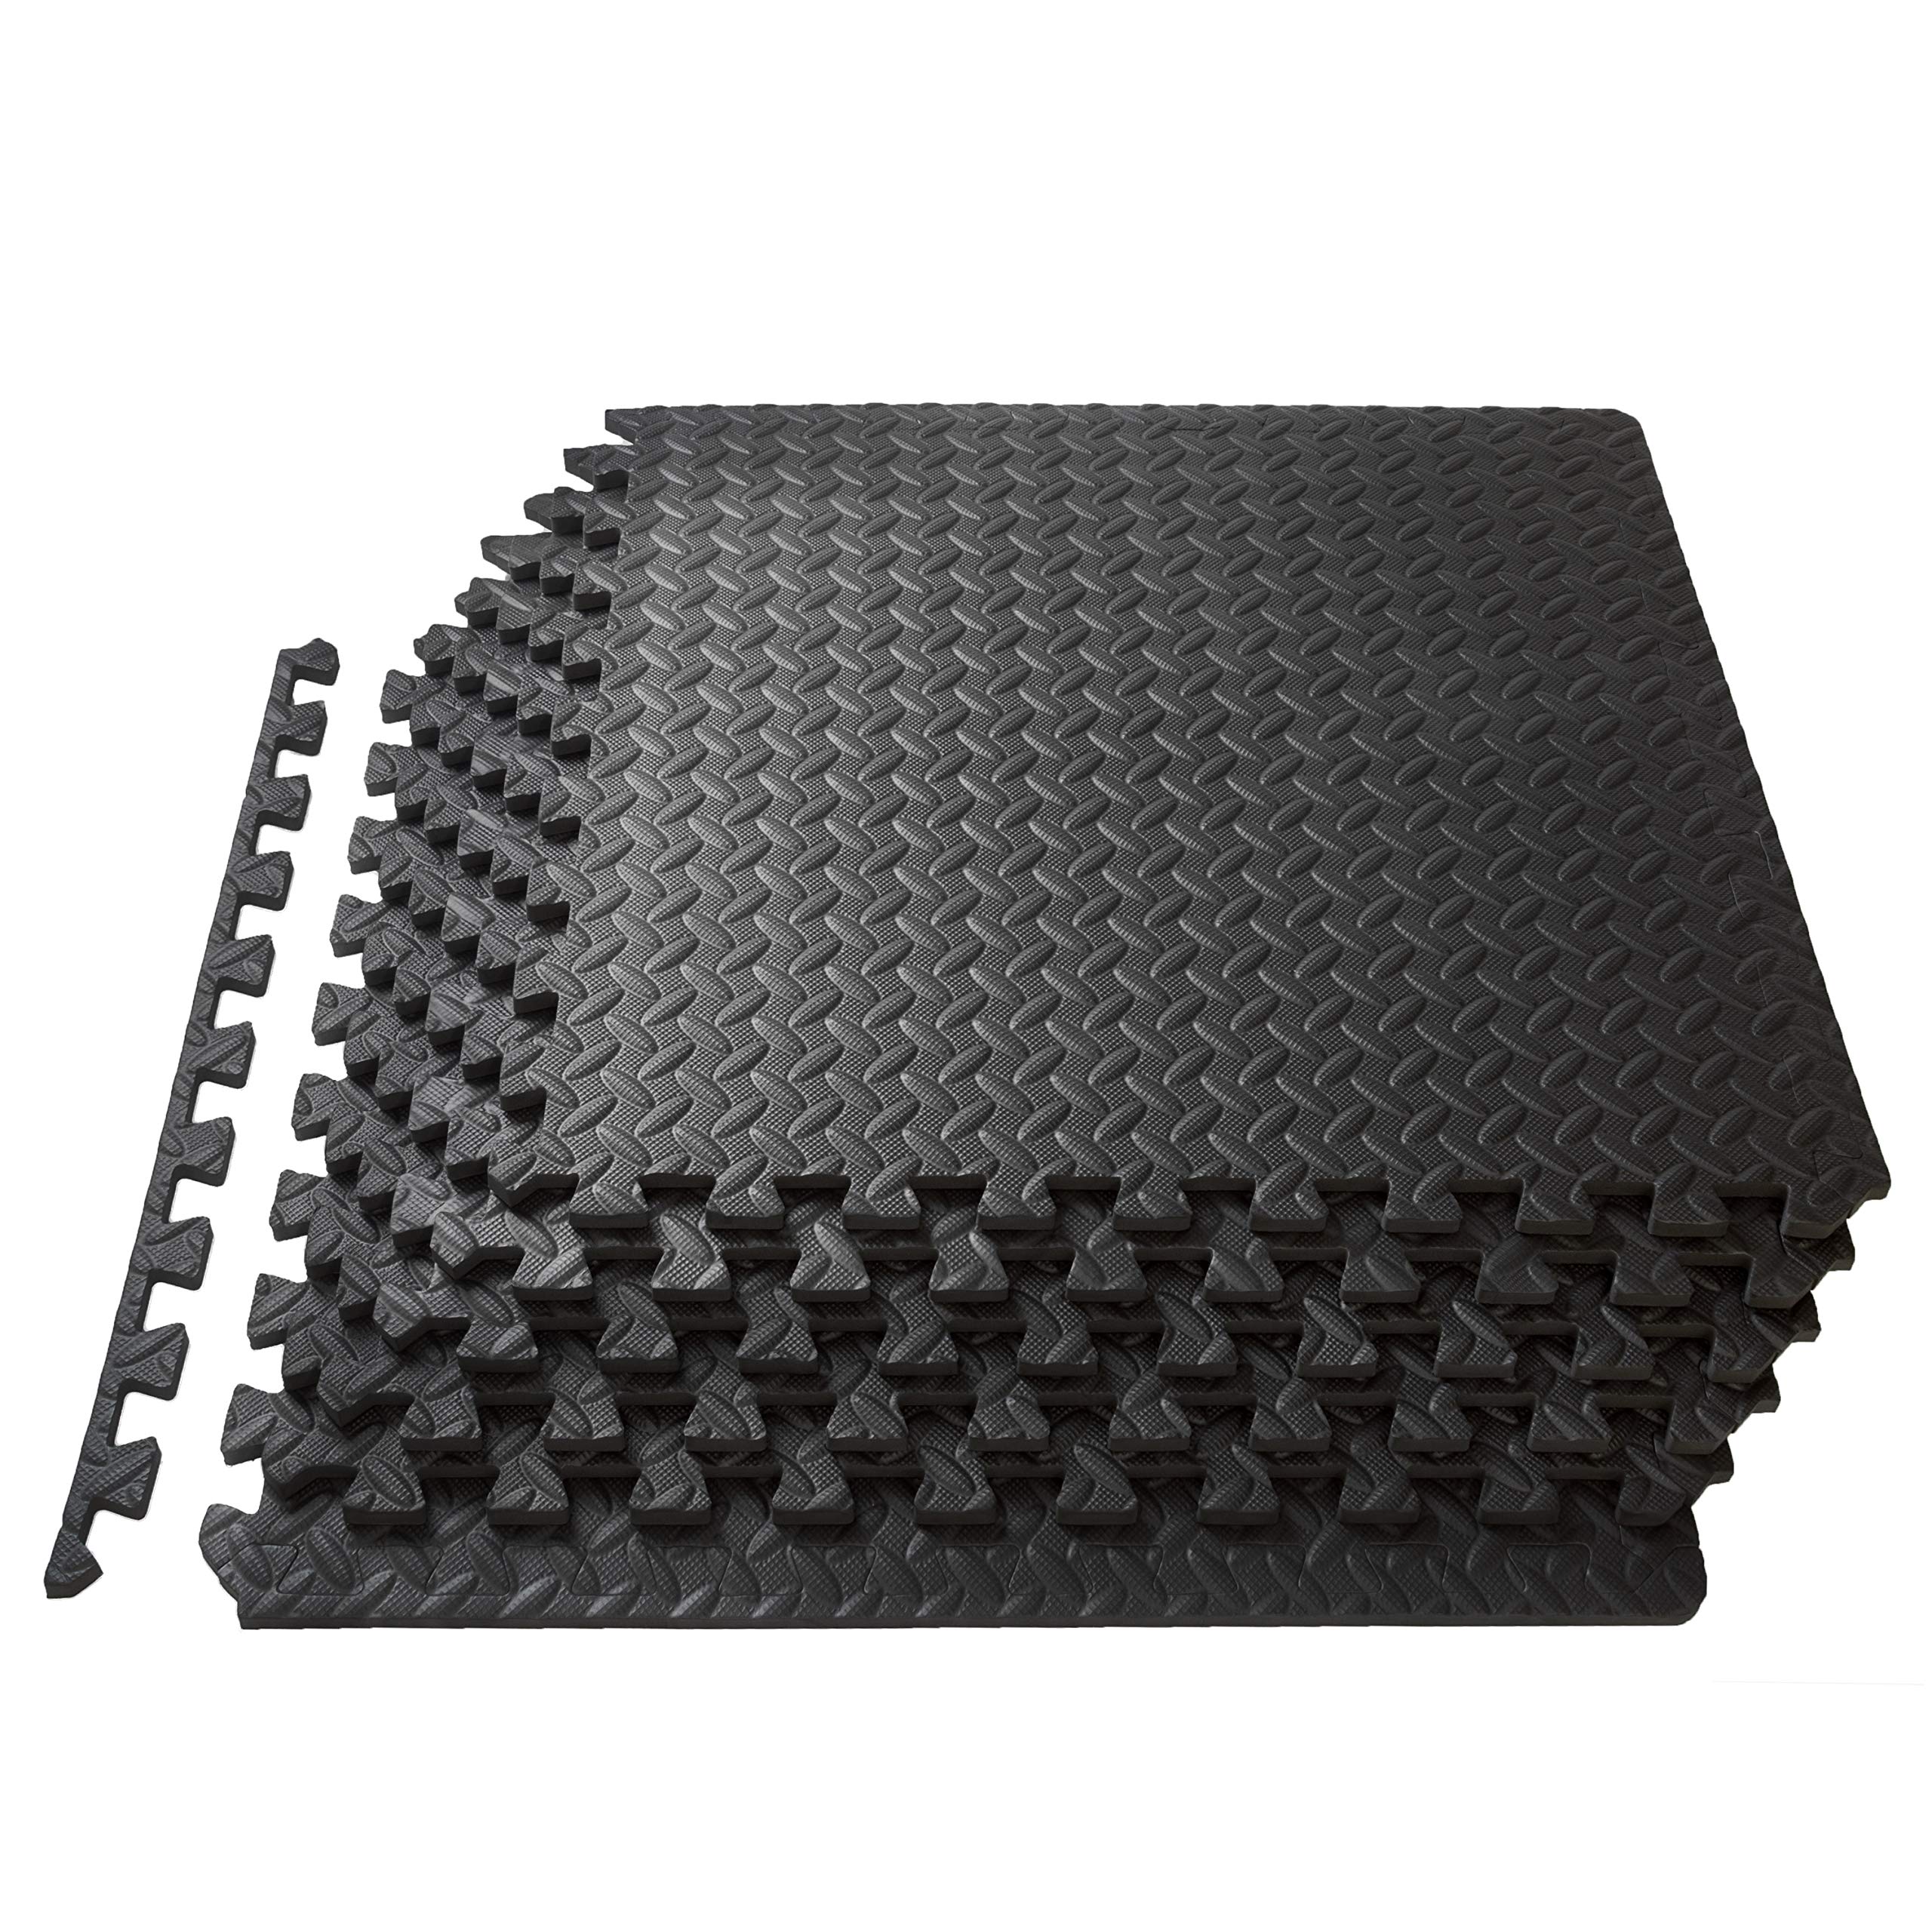 ProsourceFit Exercise Puzzle Mat, 1/2-Inch Thickness, Black